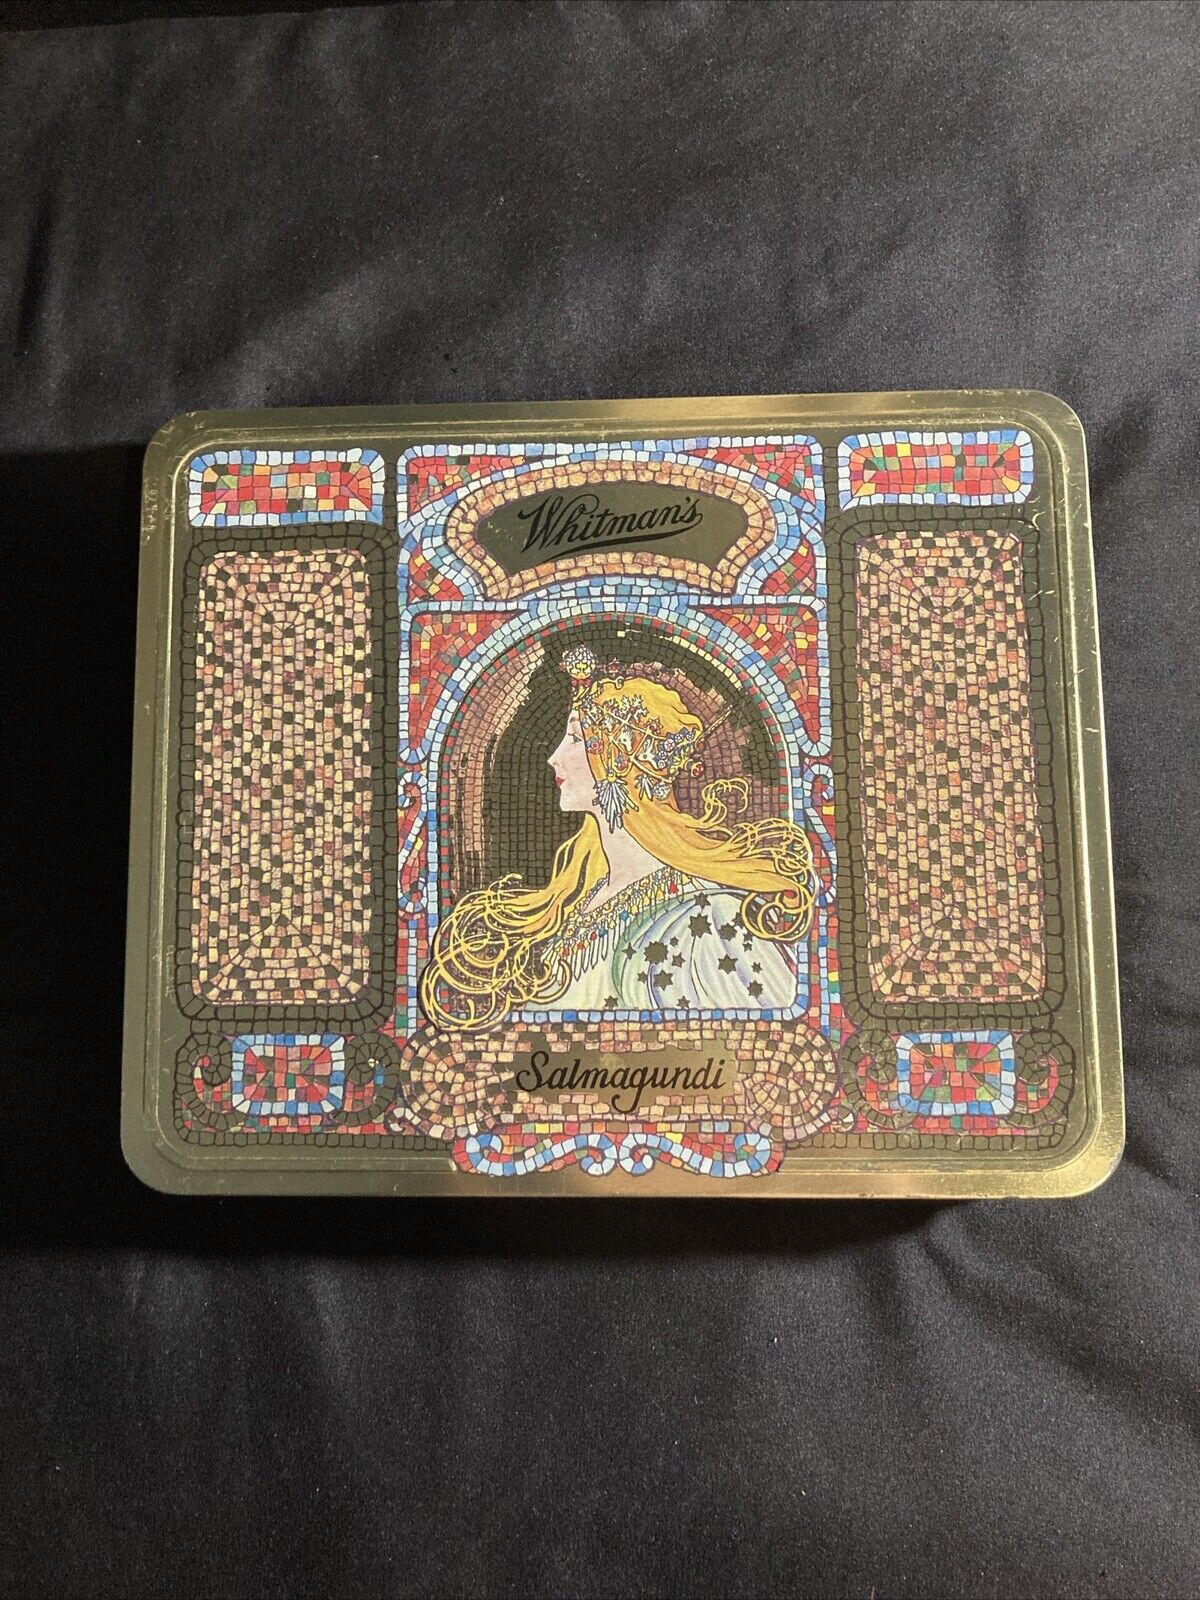 Whitmans Salmagundi Candy Metal Tin Art Nouveau Hinged Lid Collectors Edition